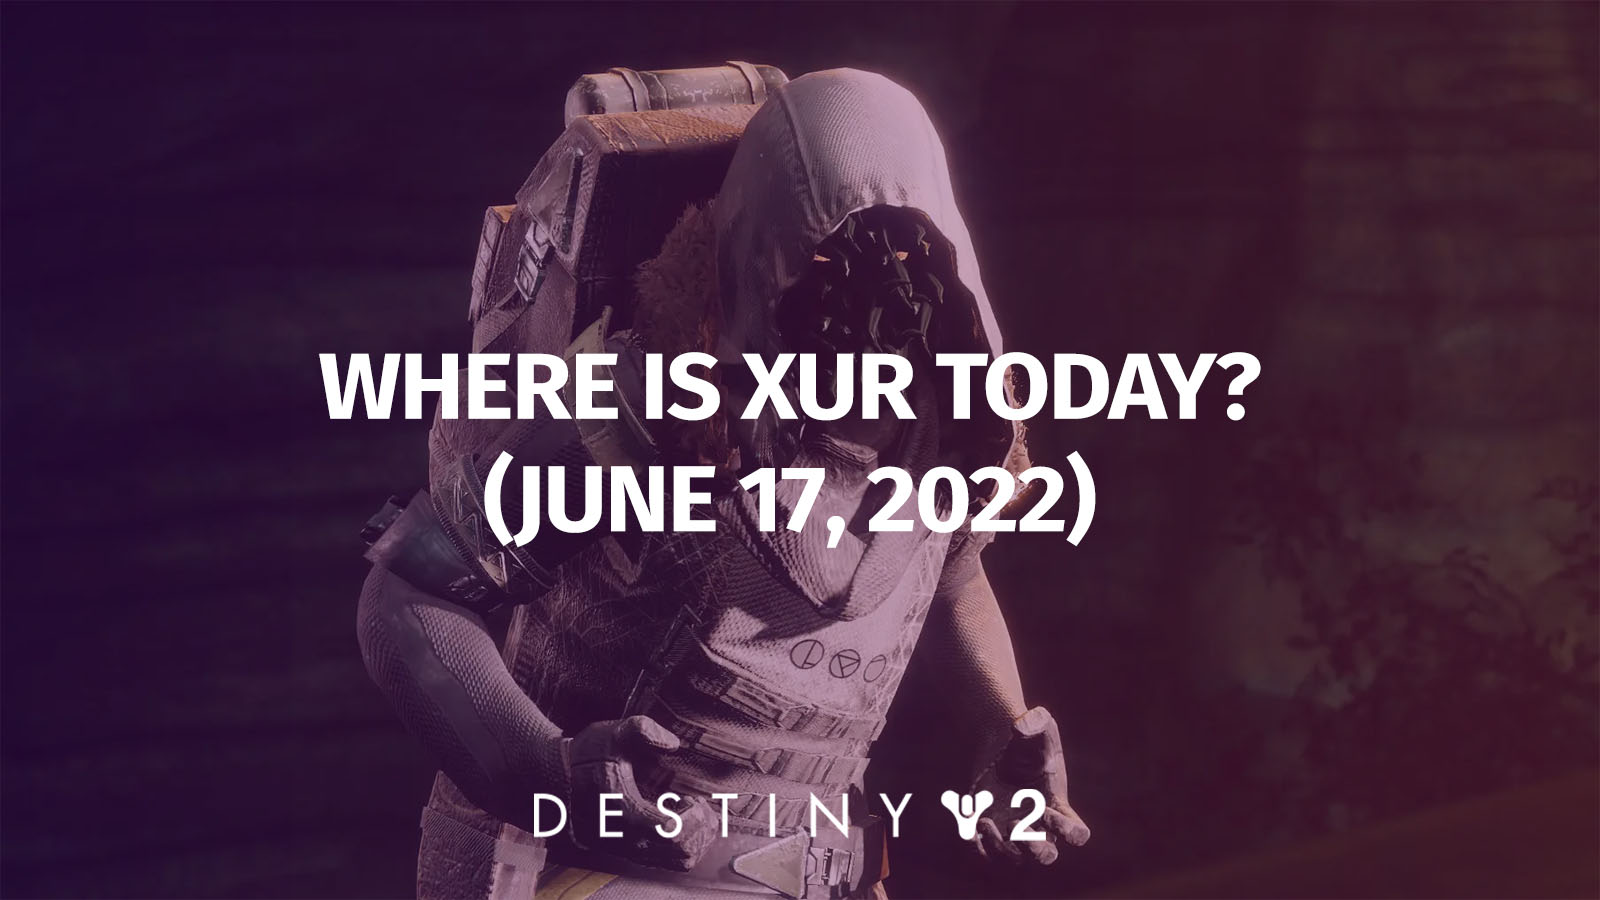 Destiny 2: Where Is Xur Today? Exotic Inventory (June 17 – June 21, 2022)